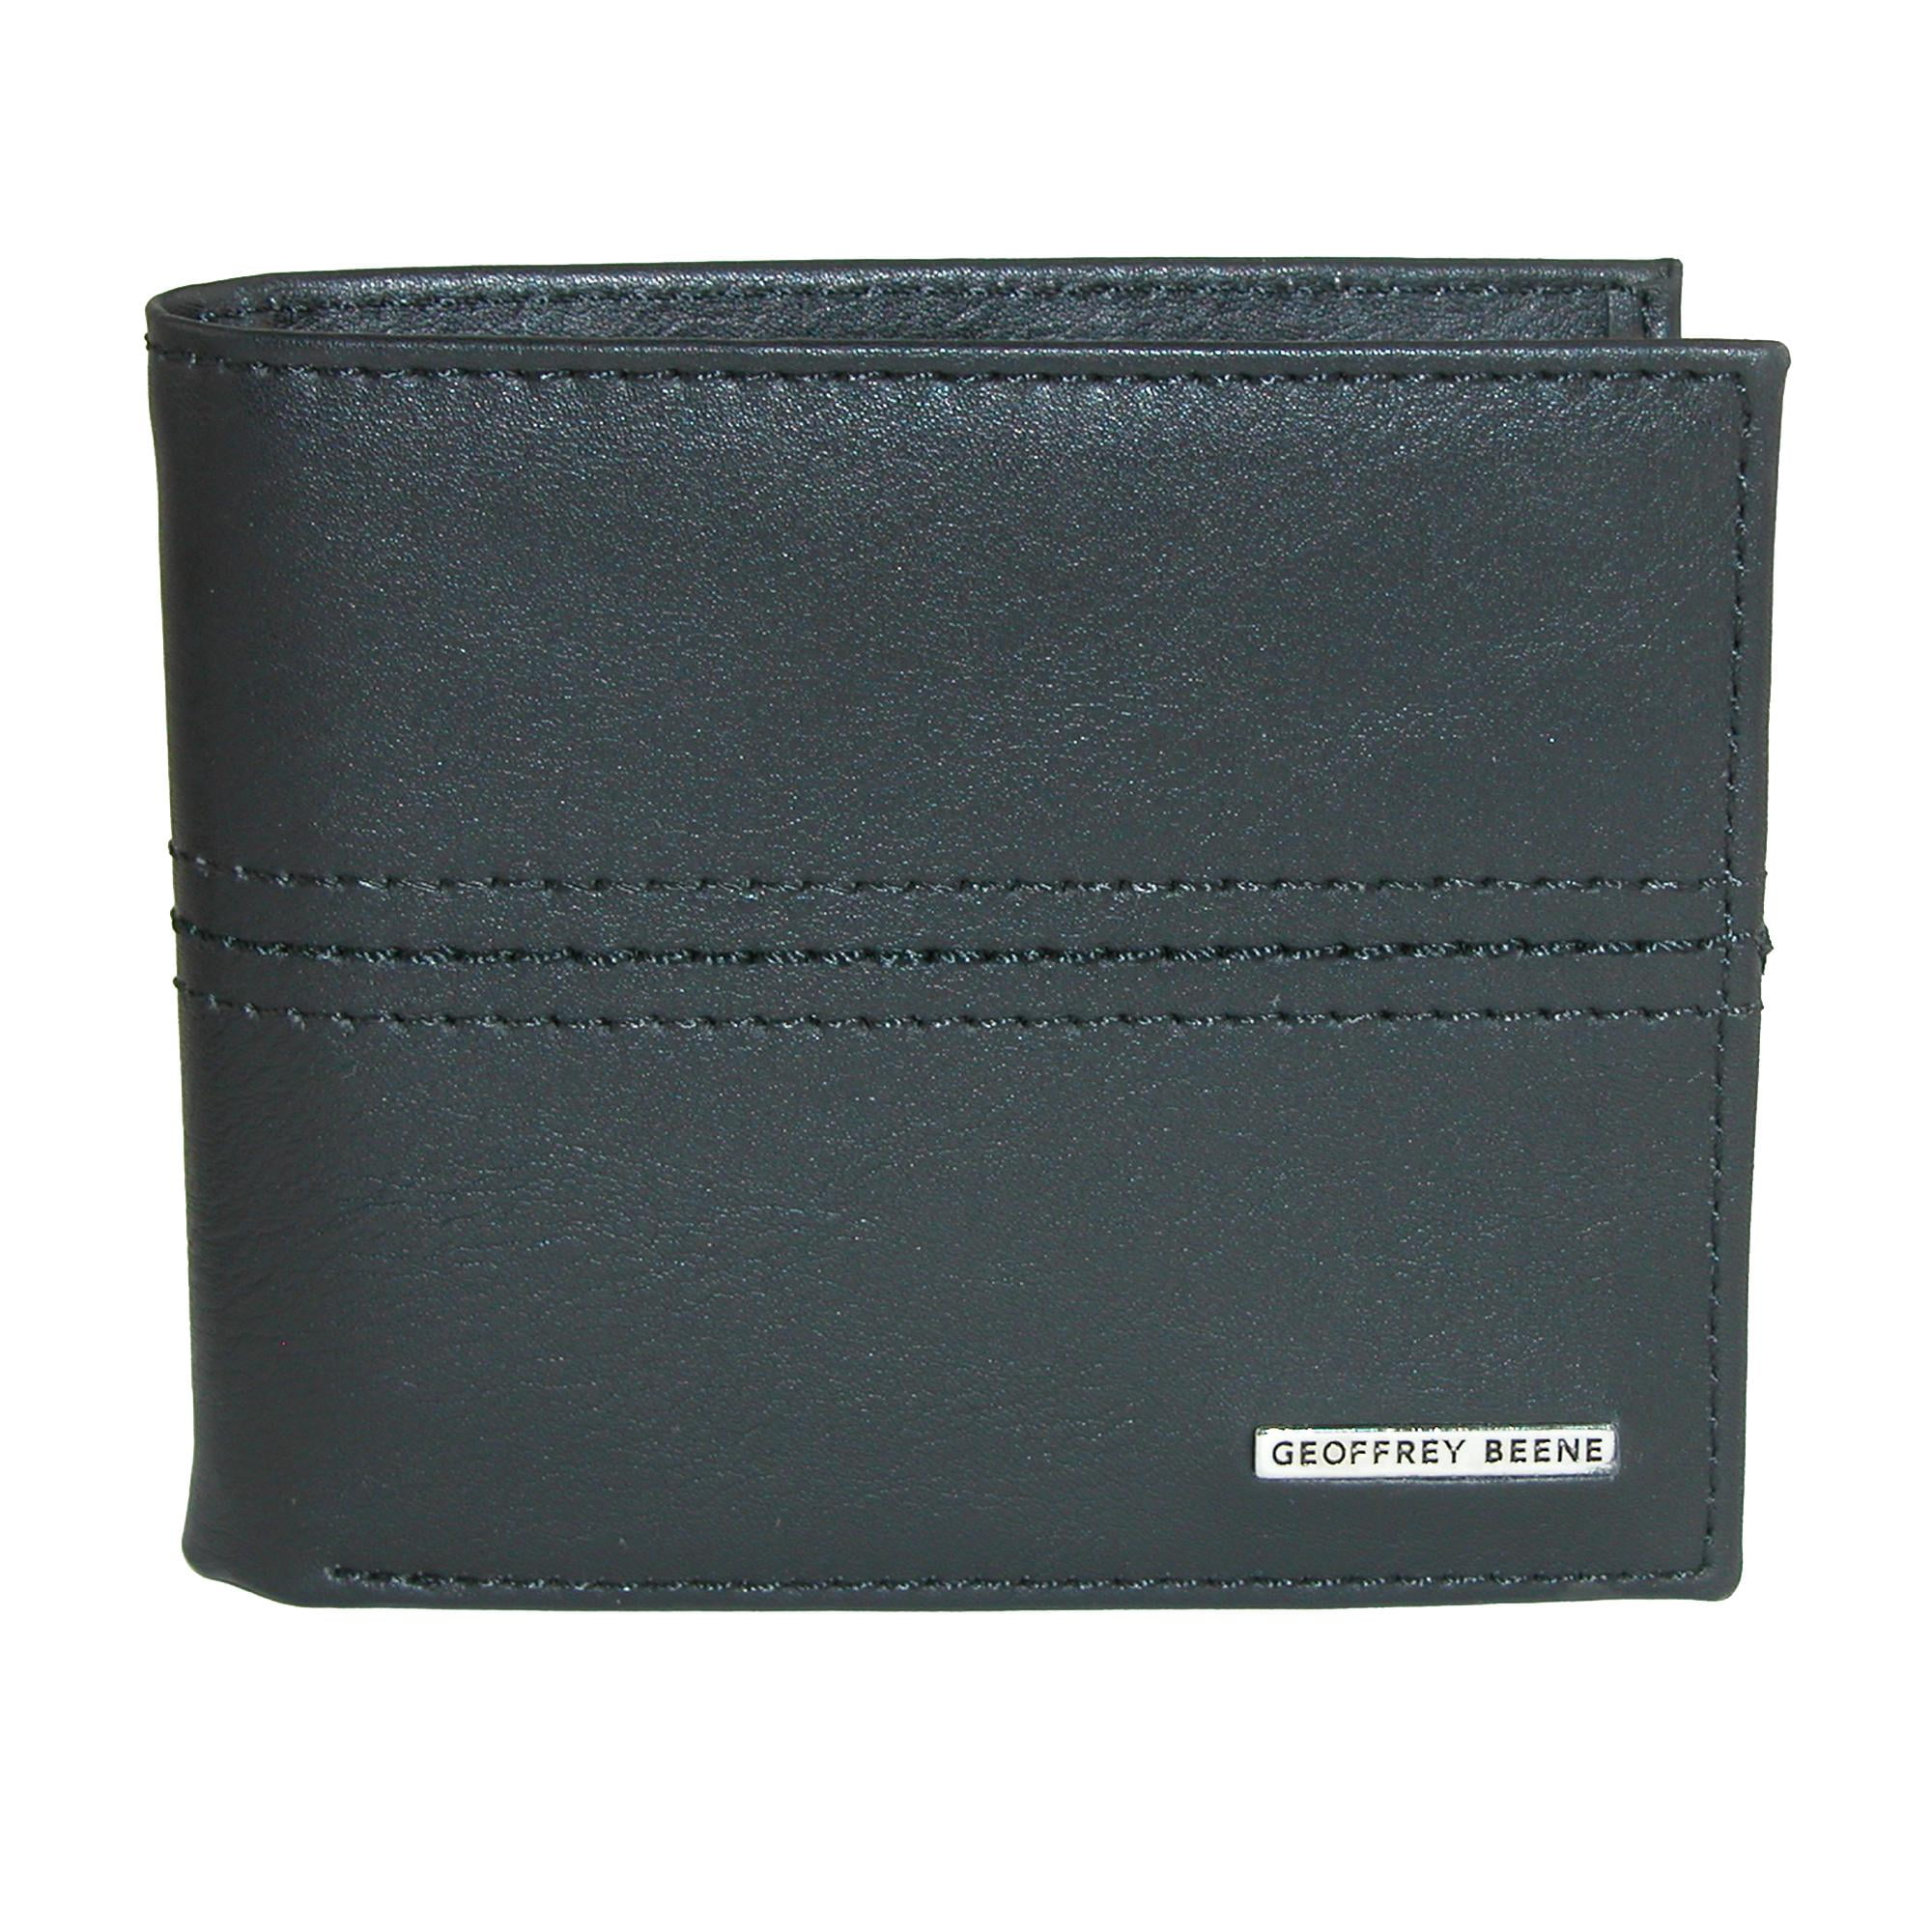 Geoffrey Beene Men's Leather Bifold Wallet with Burnished Edges ...